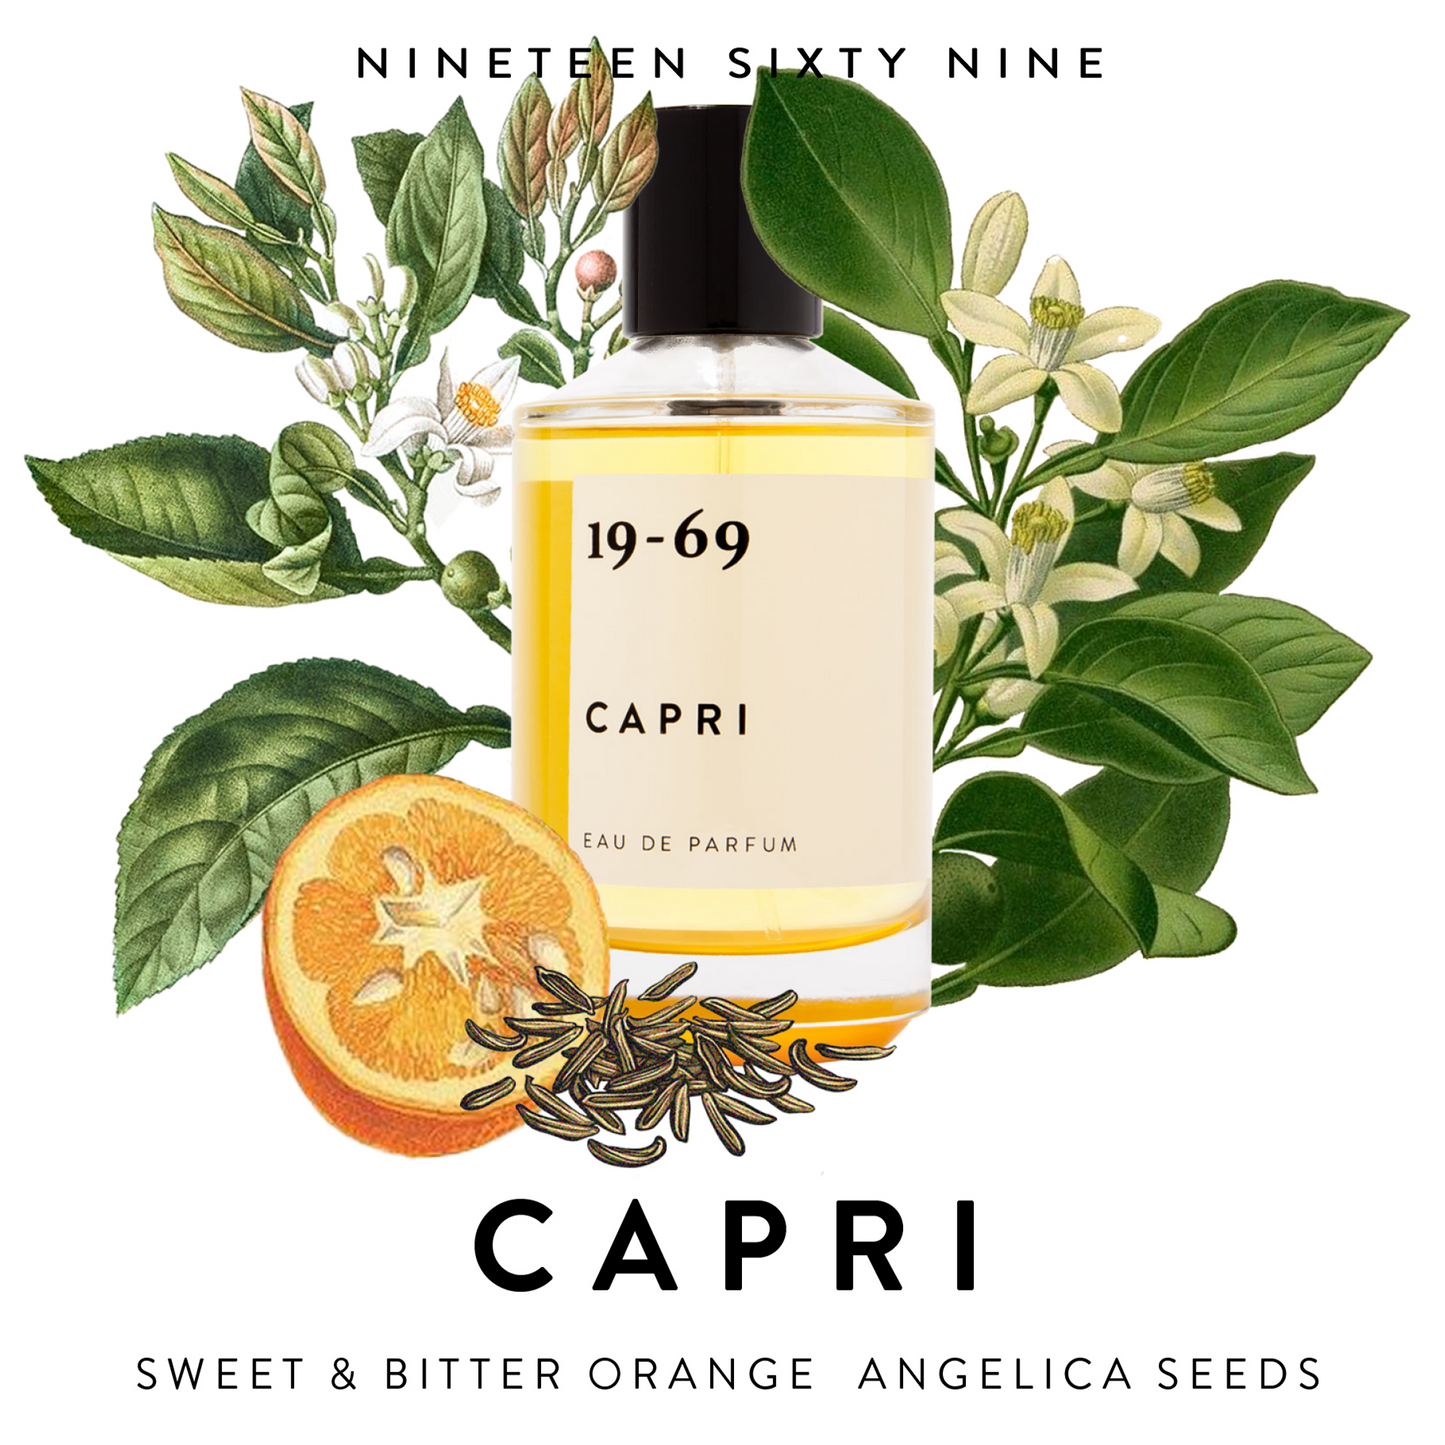 19-69 Capri Perfume: Capri is inspired by the settings of Villa Malaparte and the iconic film Le Mépris (1963) that was filmed on the Isle of Capri.  The composition is edgy, fresh, light yet comforting. Fragrance notes include Sweet and Bitter Orange, Ylang Ylang Extra Oil and White Musk. All 19-69 perfumes are suitable for any gender.